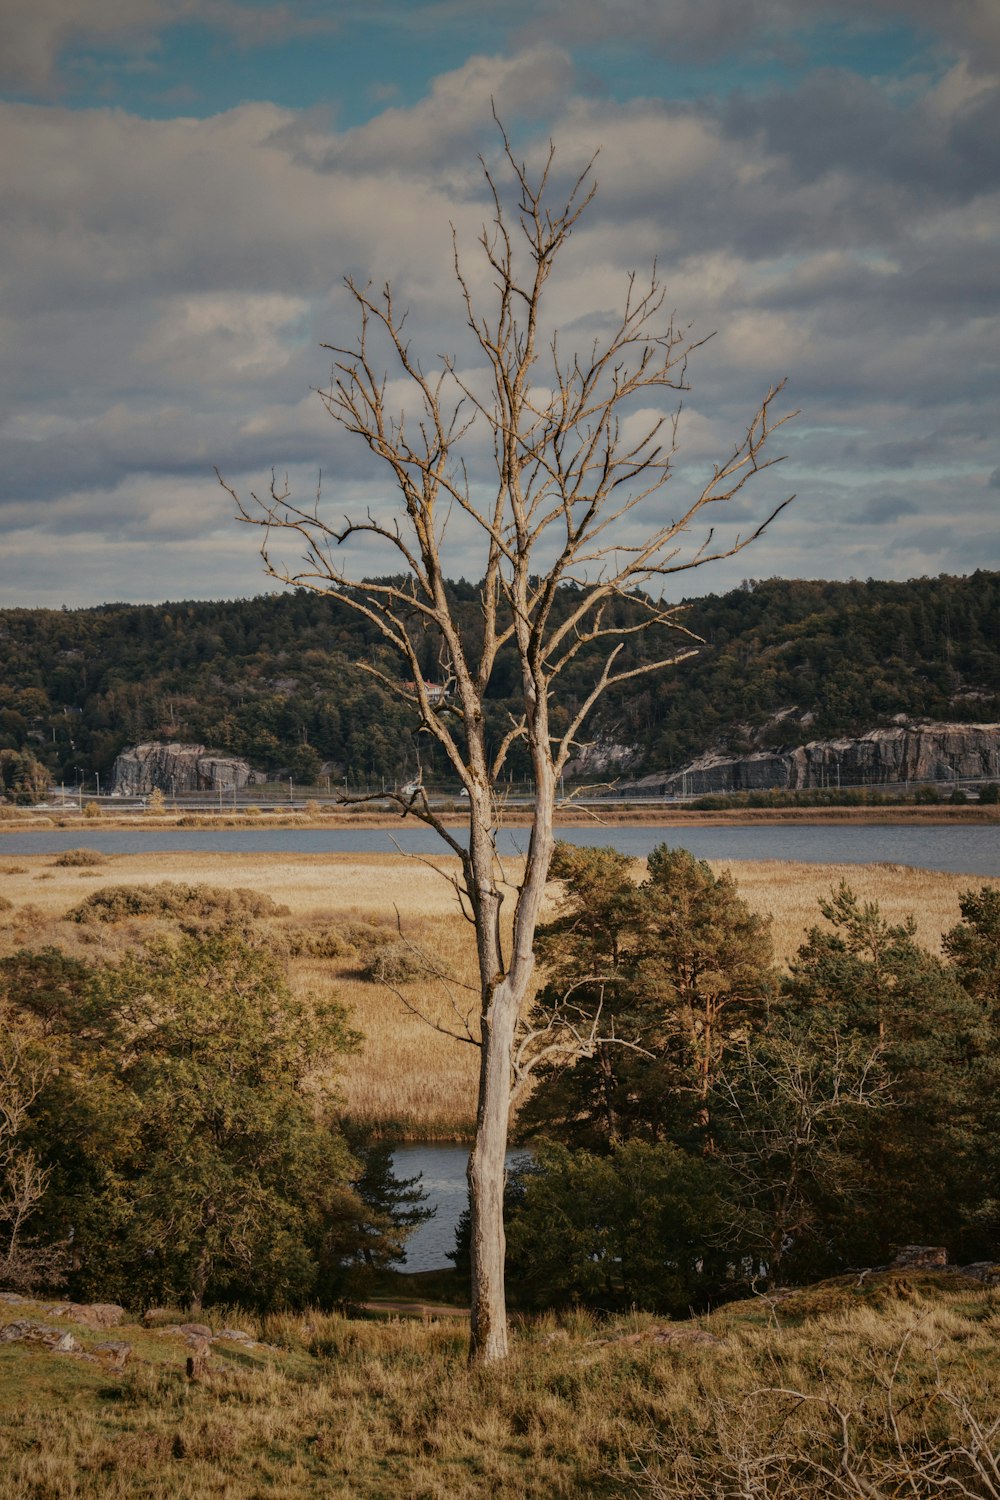 a bare tree in a field with a body of water in the background